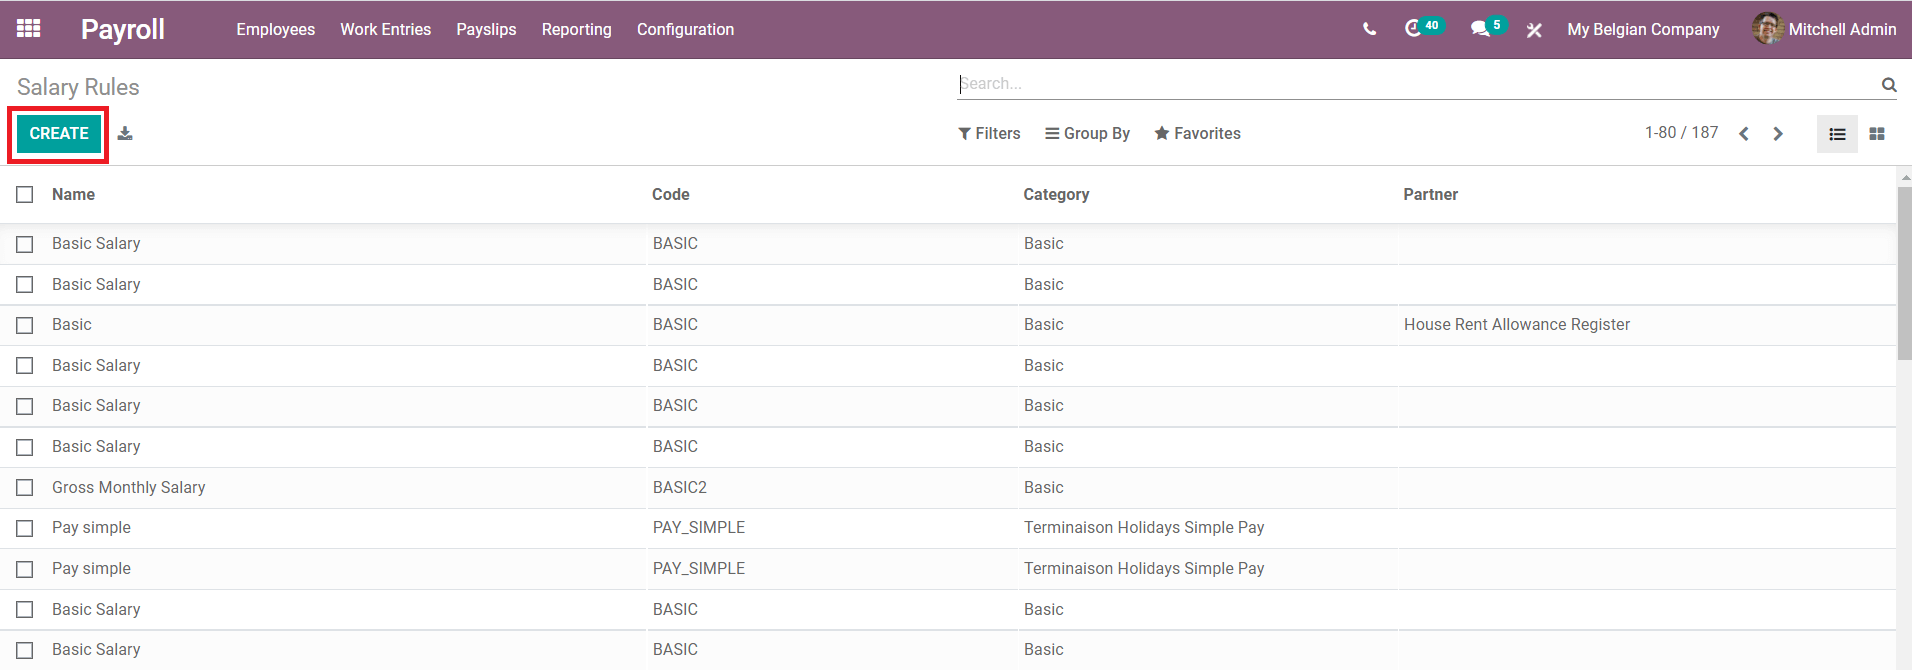 salary-structure-and-rules-configuration-in-odoo-payroll-module